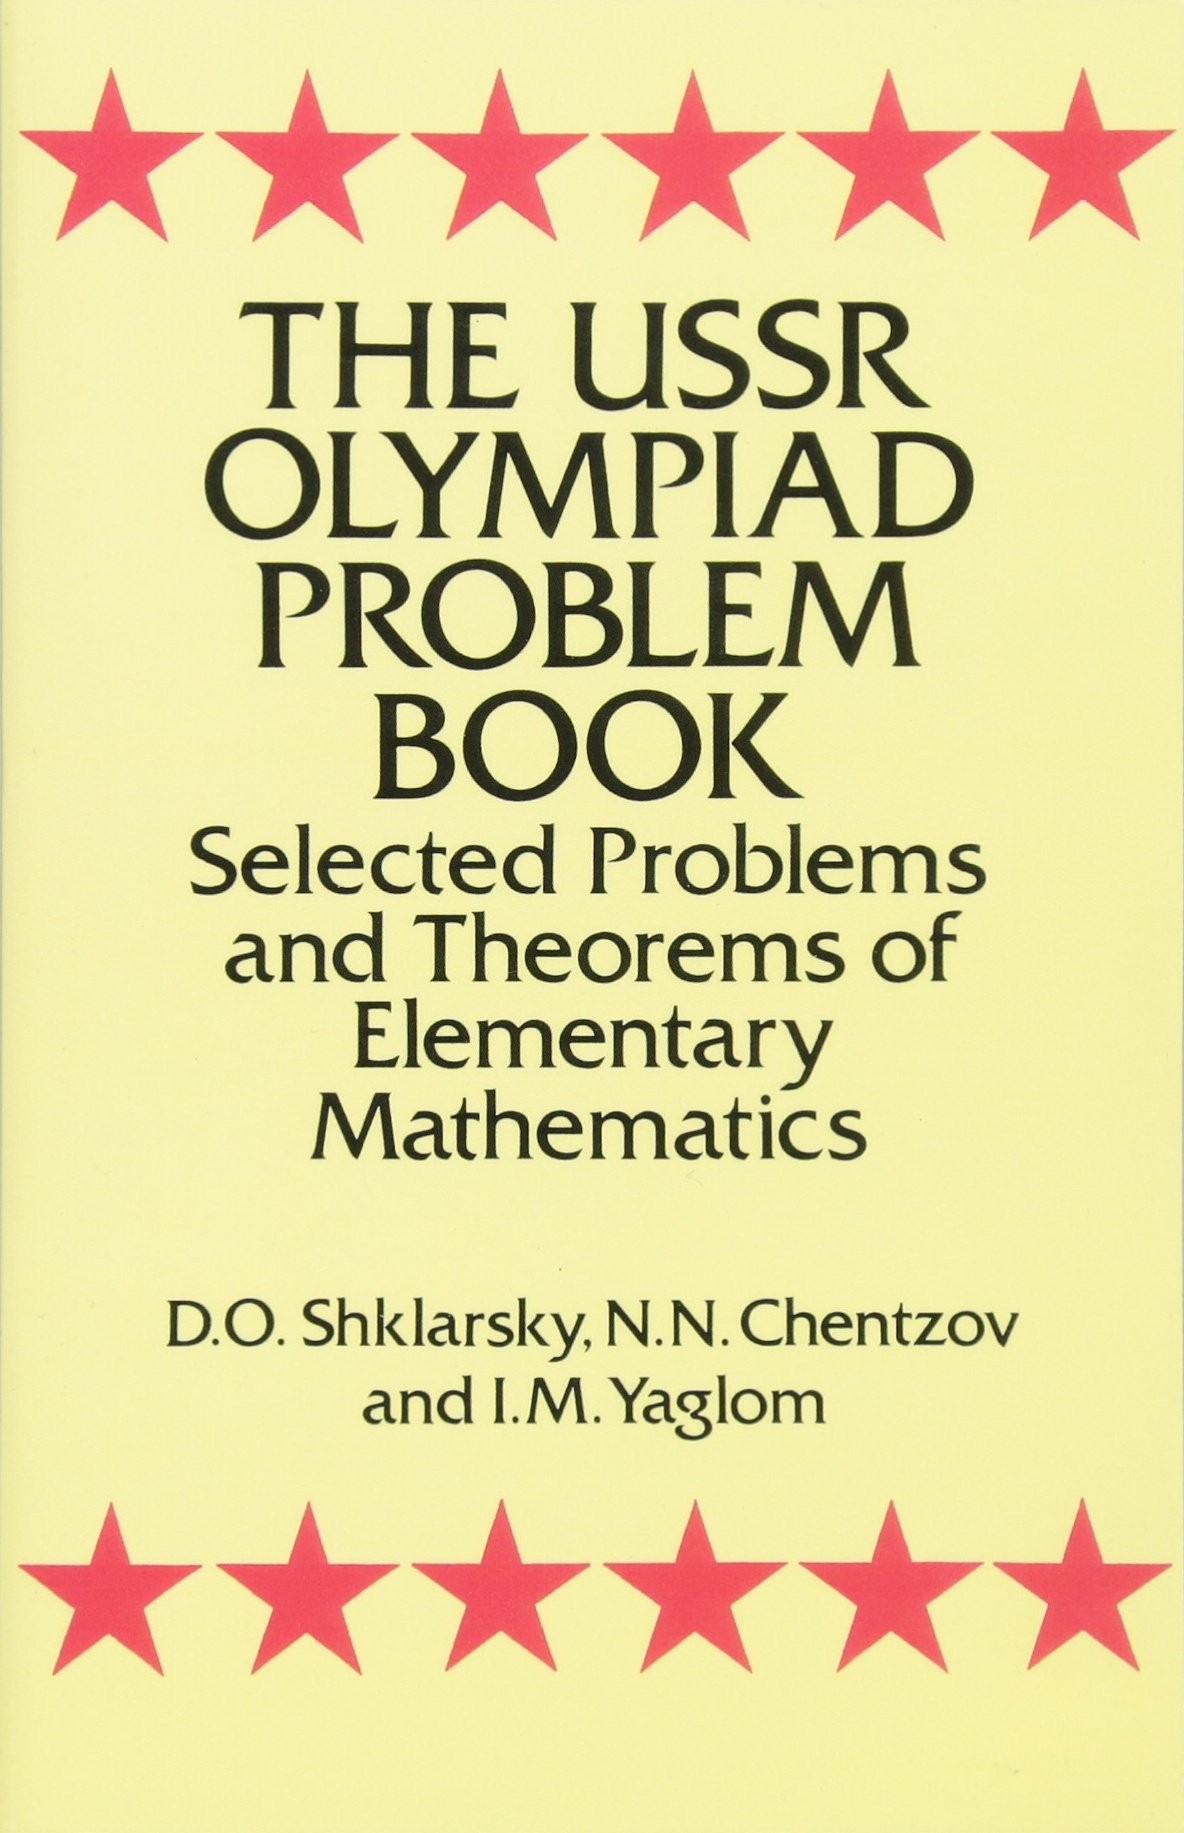 The USSR Olympiad Problem Book: Selected Problems and Theorems of Elementary Mathematics